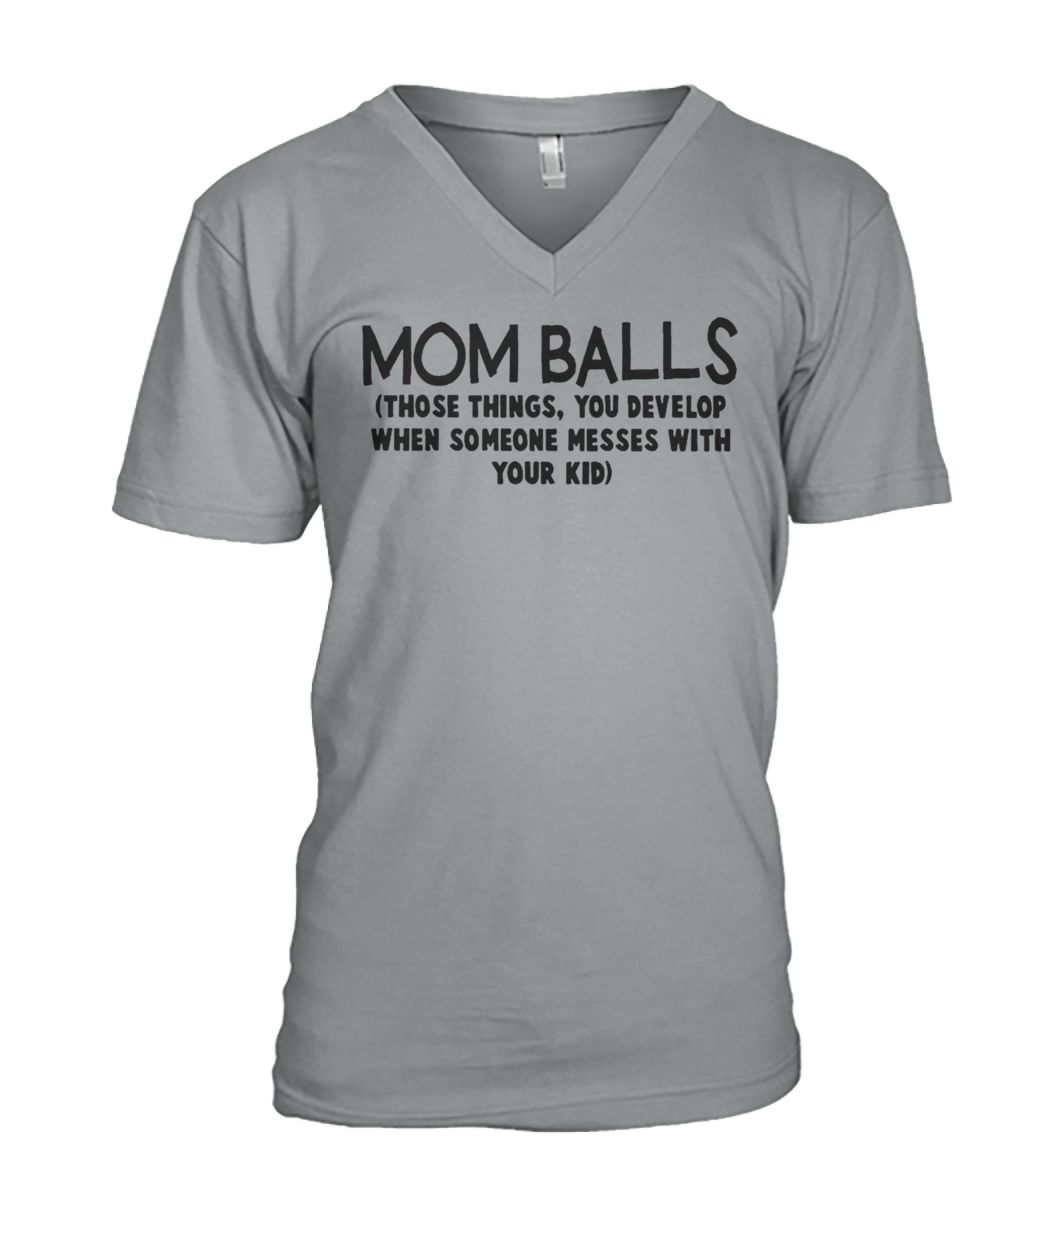 Mom balls those things you develop when someone messes with your kid mens v-neck